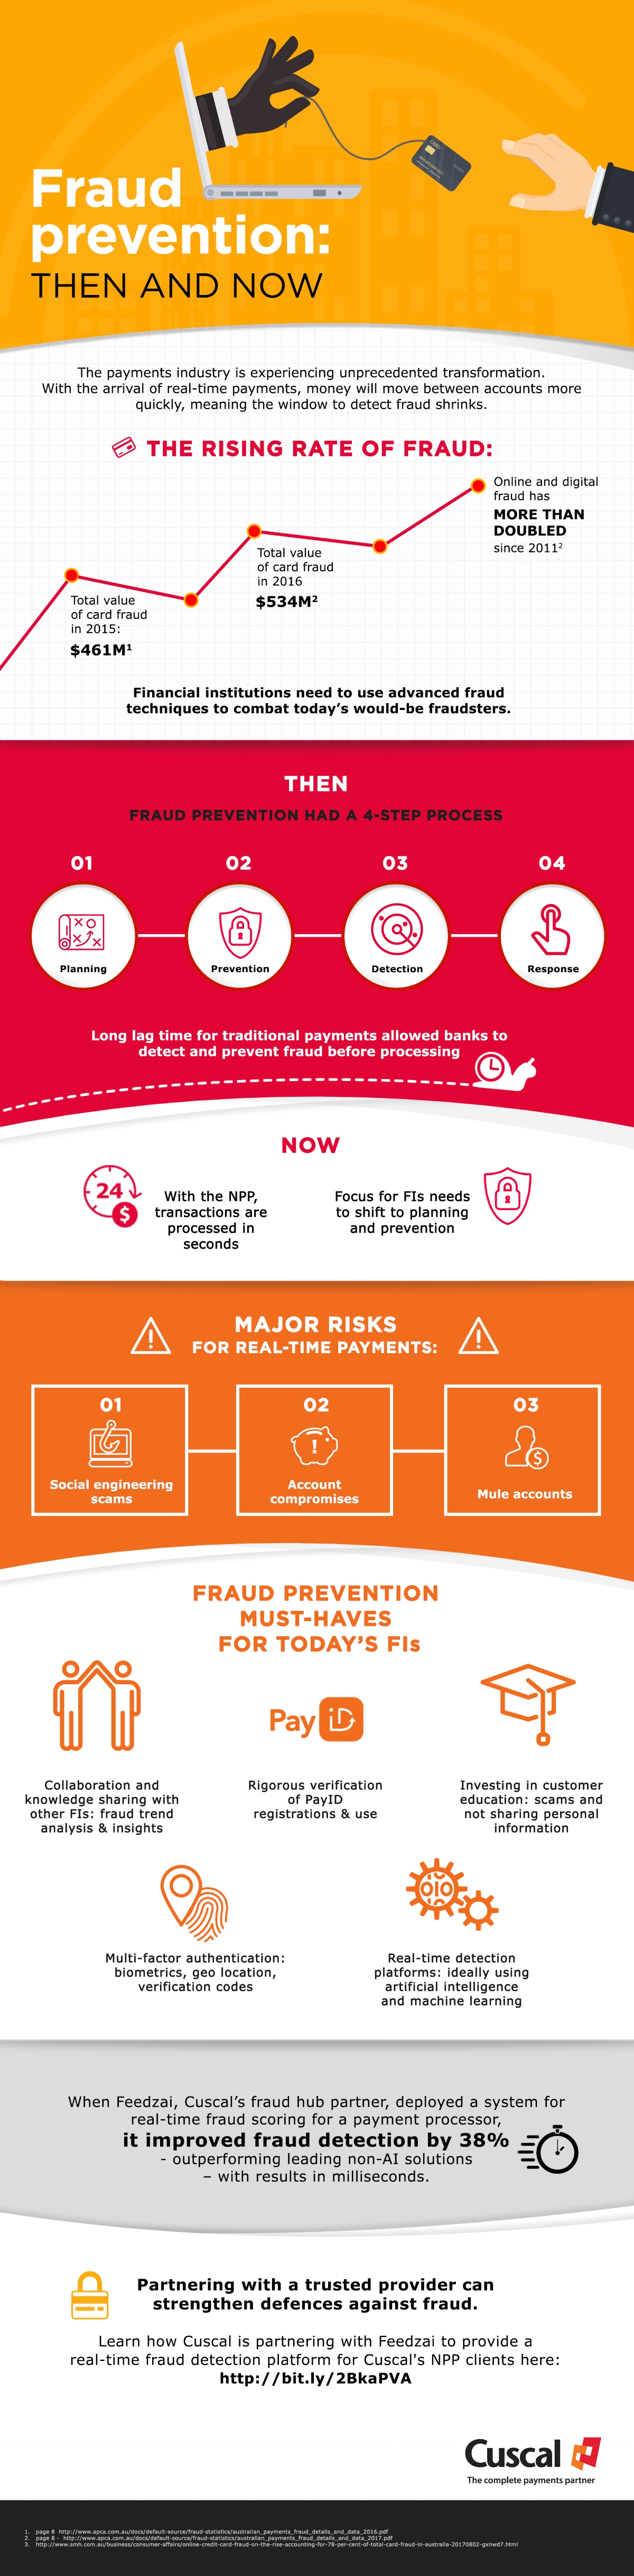 Infographic on the evolution of fraud